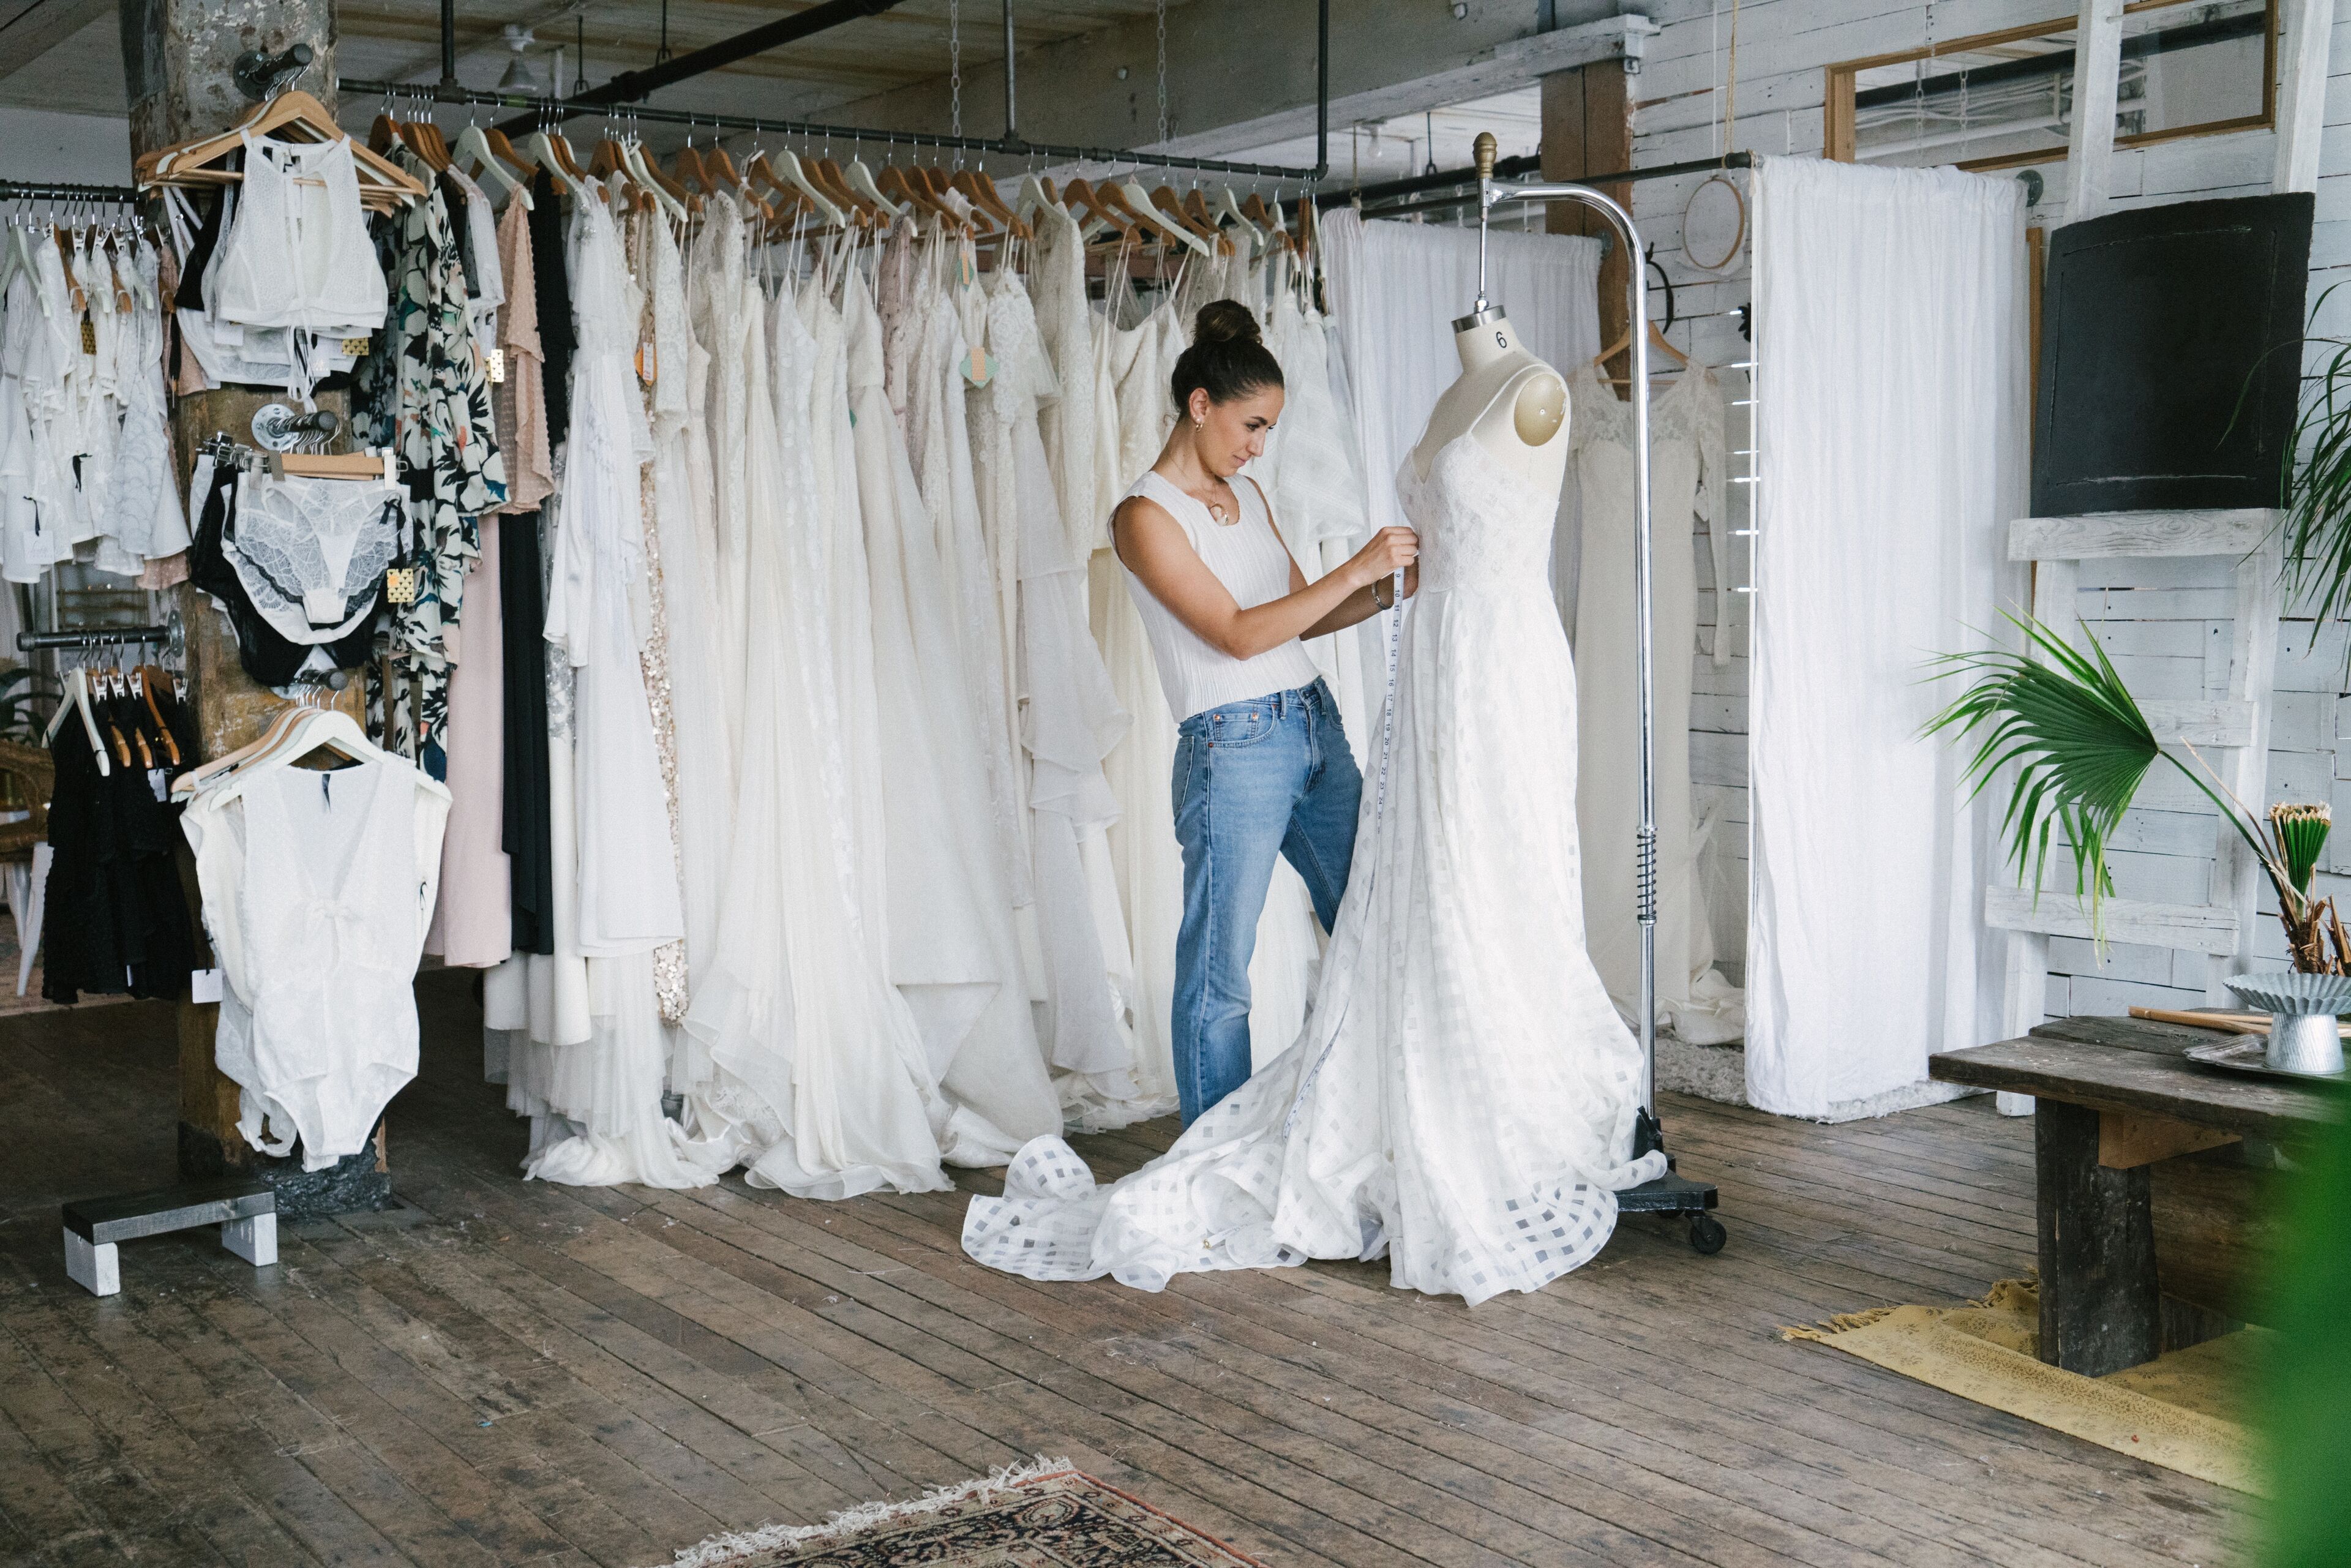 A woman tailoring a bridal gown in a boutique with various dresses in the background.